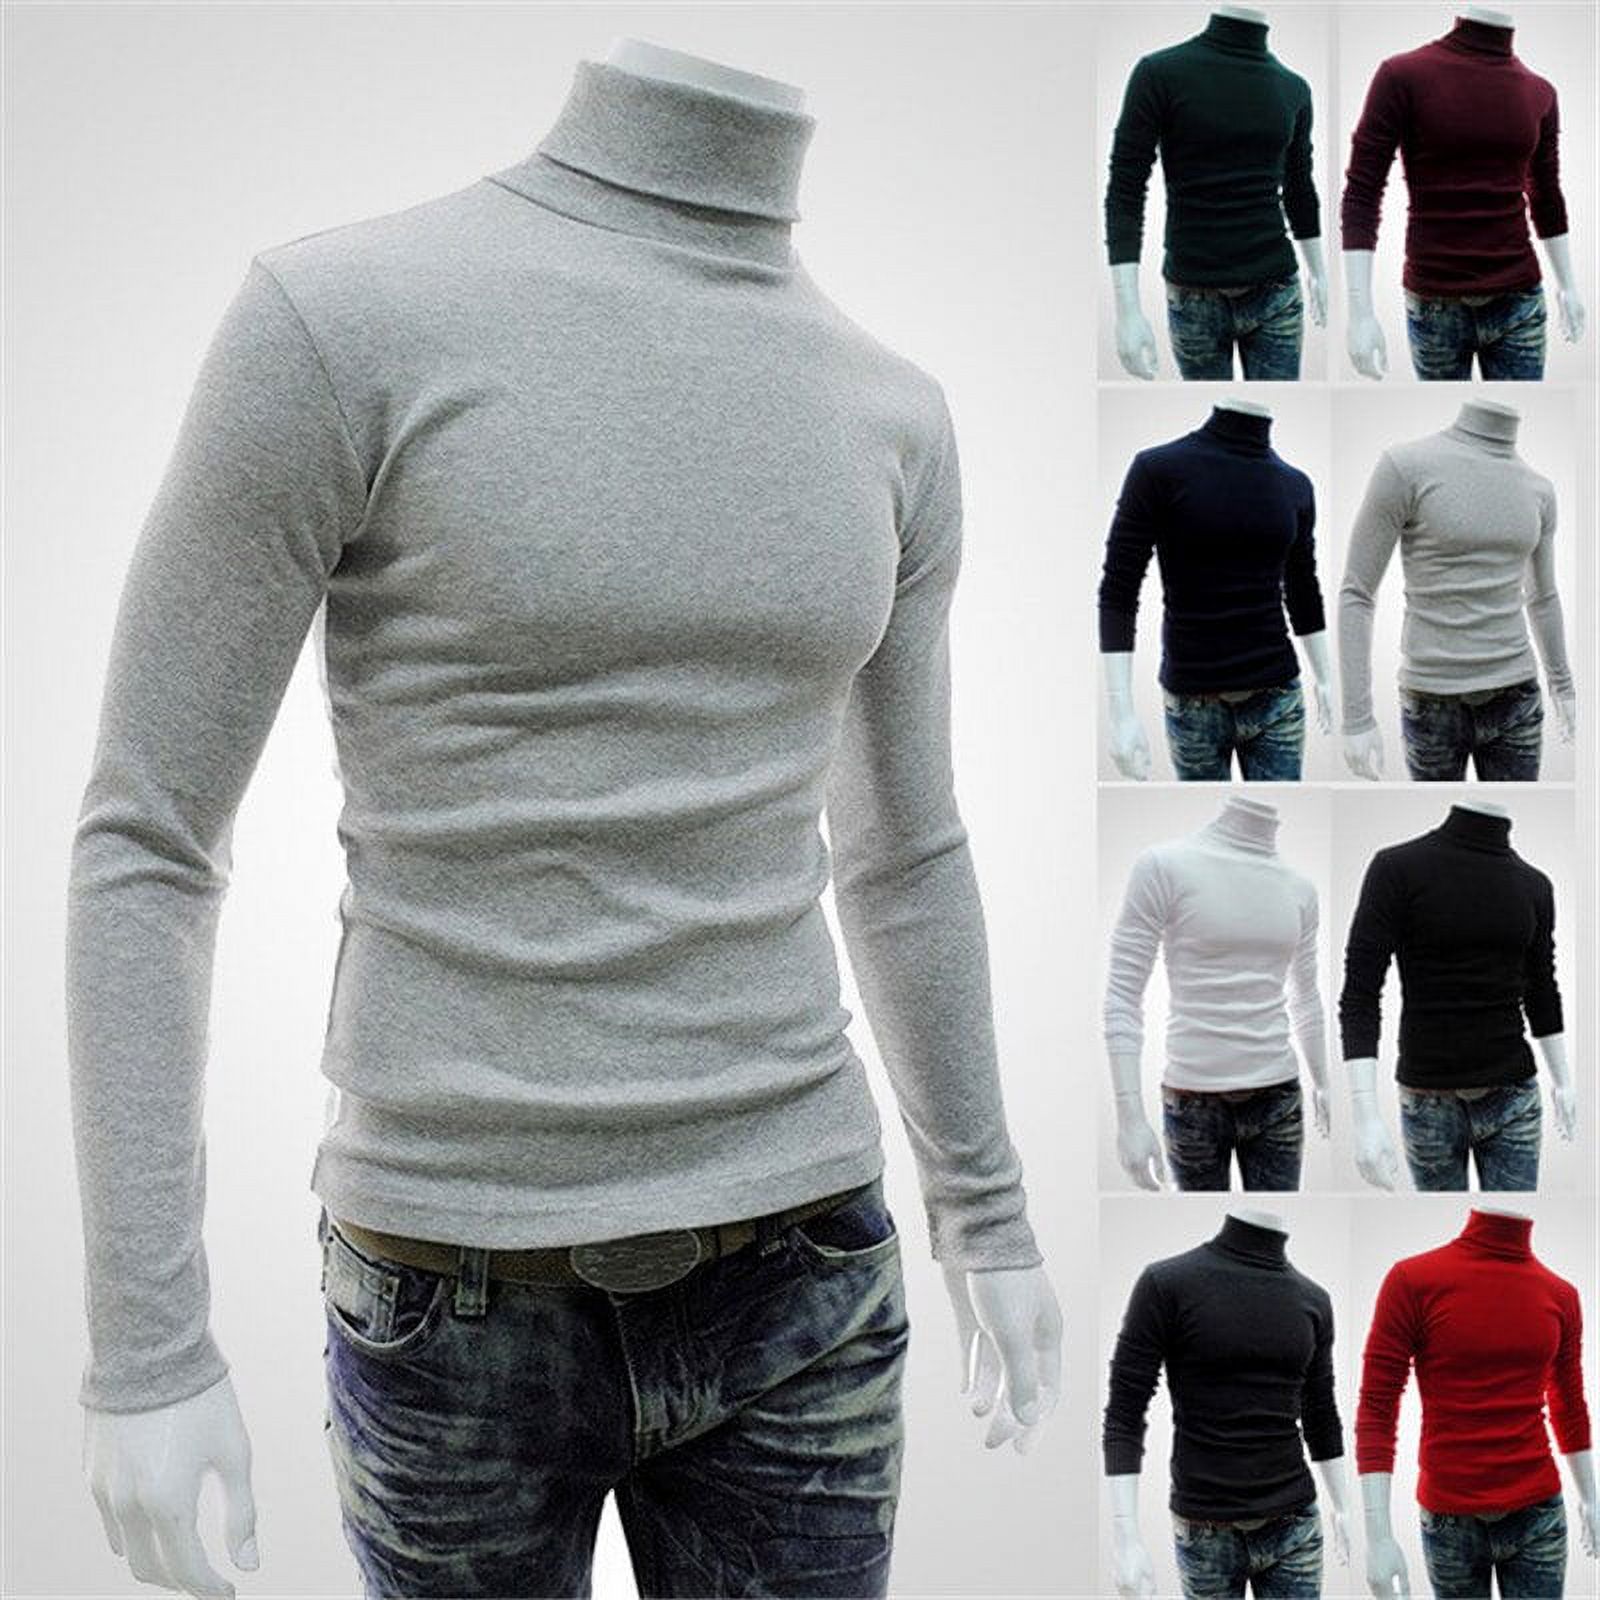 Seyurigaoka Fashion Mens Polo Roll Turtle Neck Pullover Knitted Jumper Tops Sweater Shirt - image 3 of 6